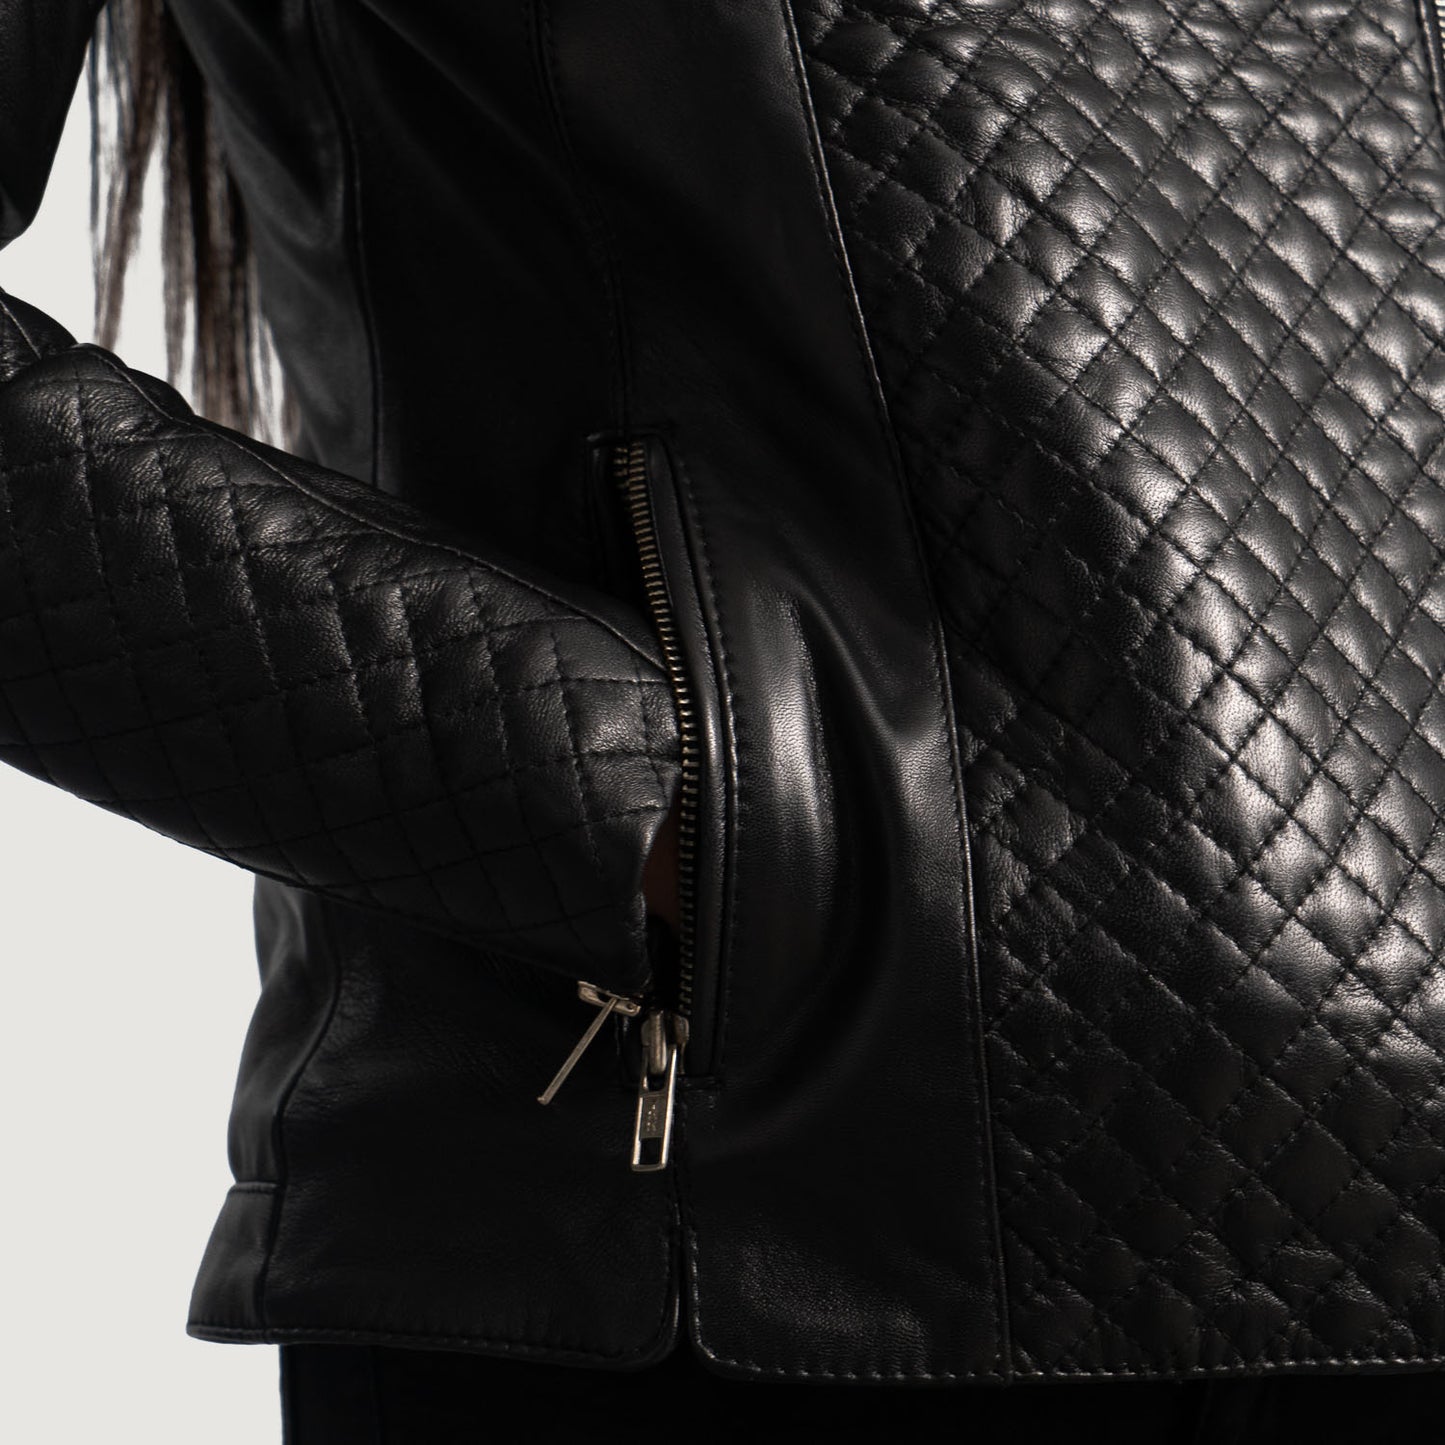 Buy Best Classic Looking Fashion Orient Grain Quilted Black Leather Biker Jacket